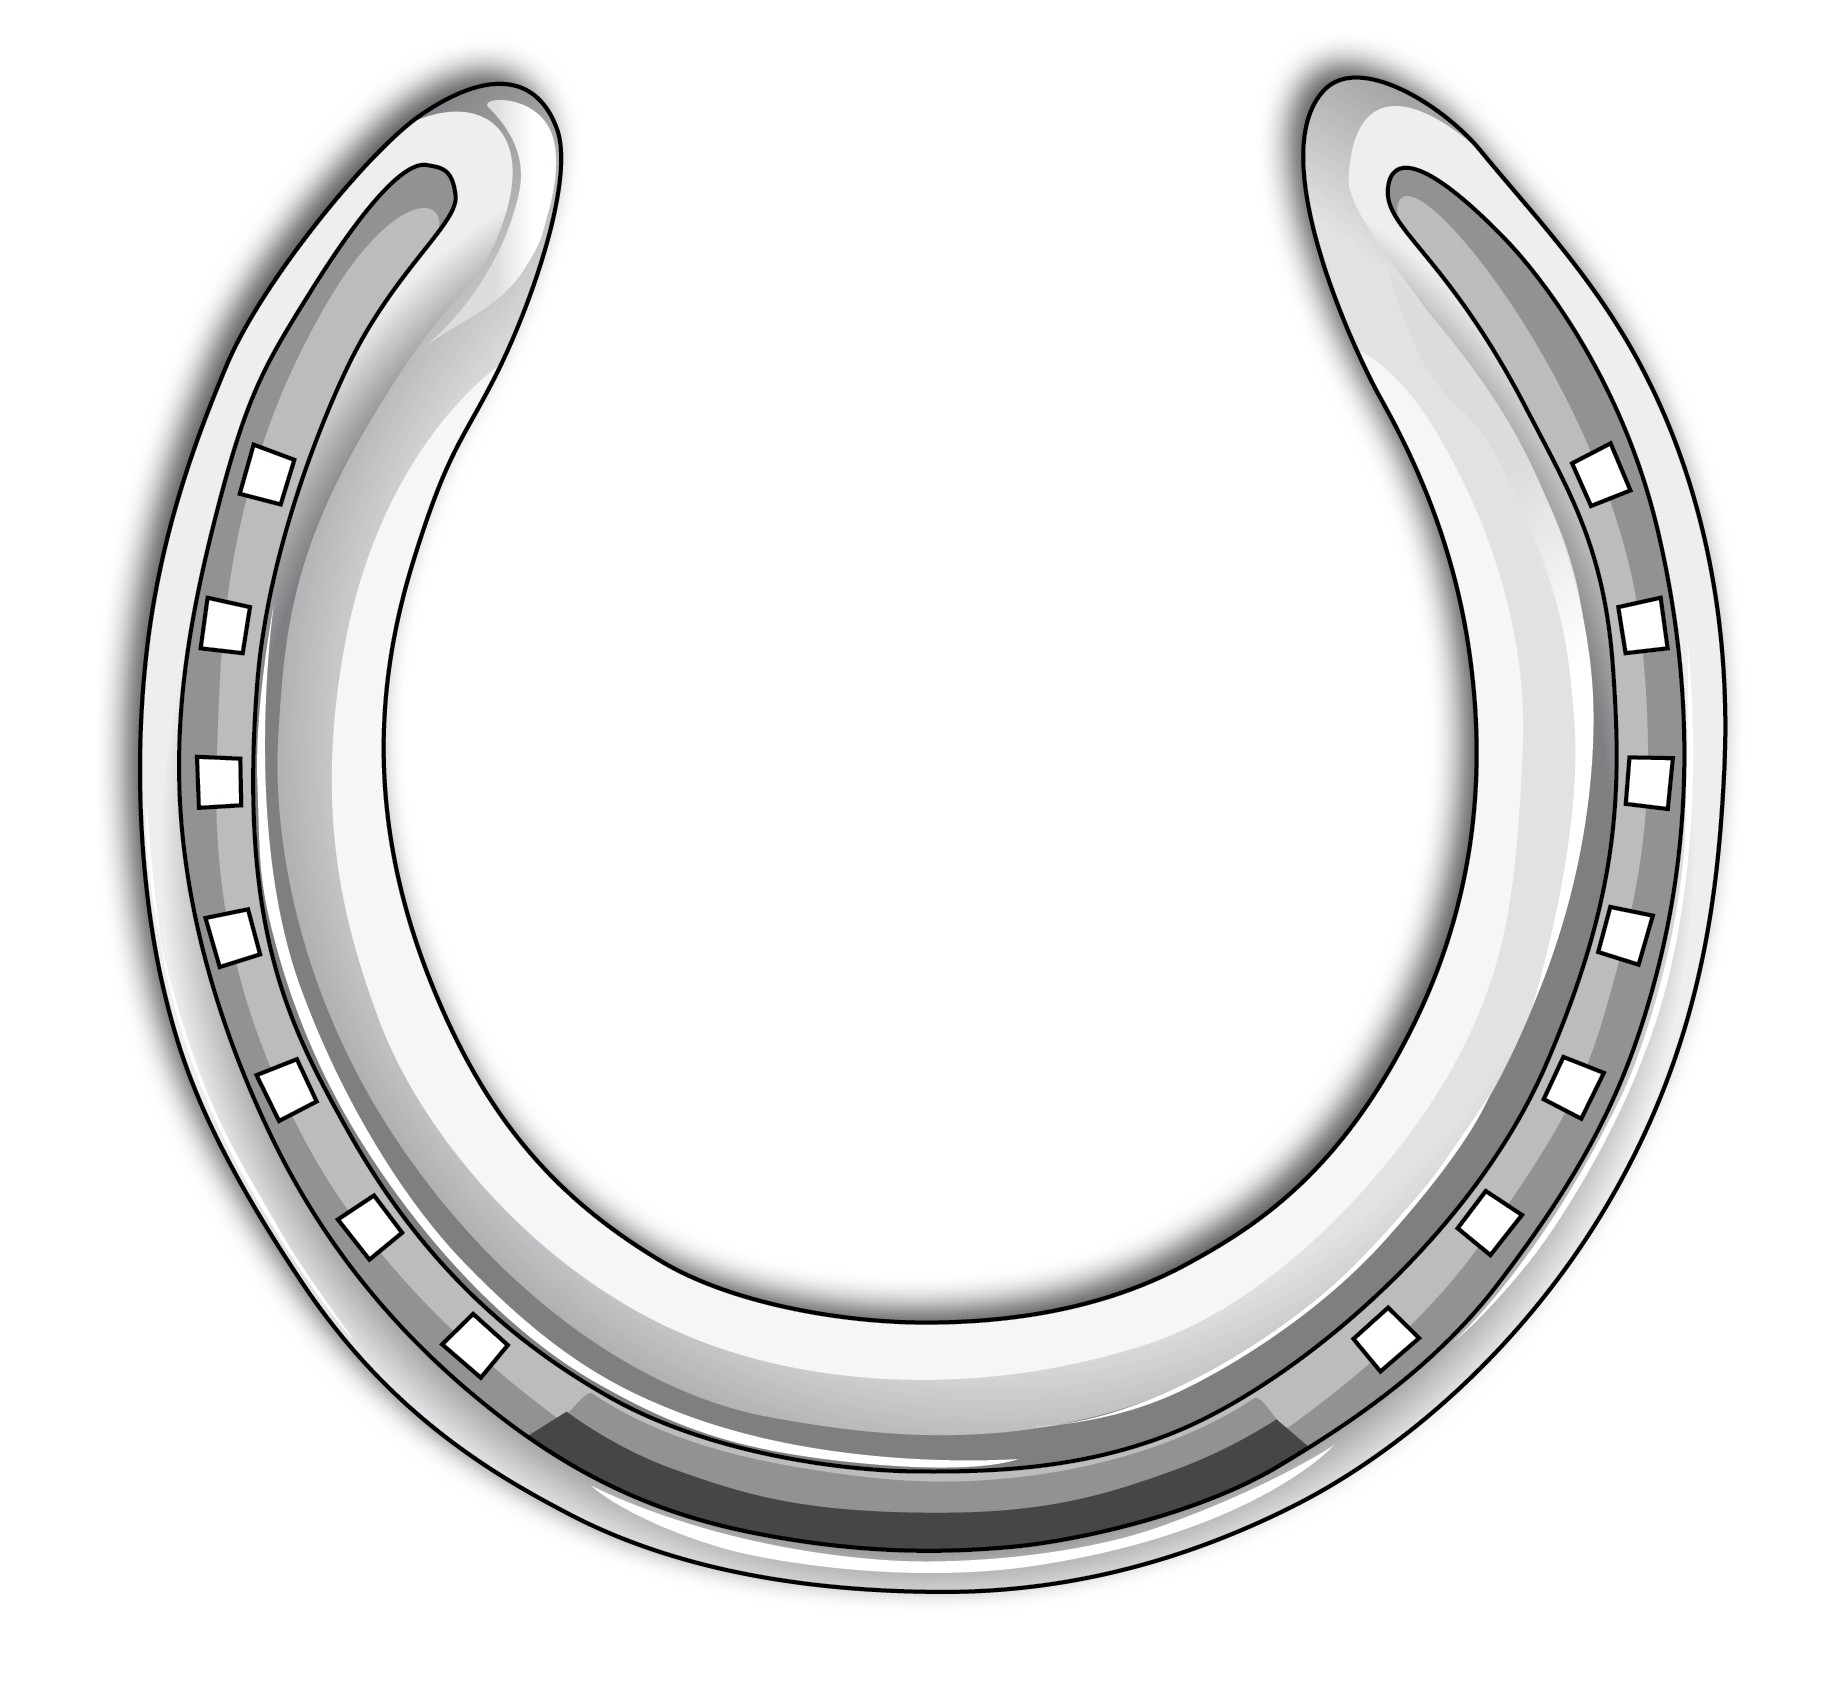 Drawings Of Horseshoes Cliparts.co